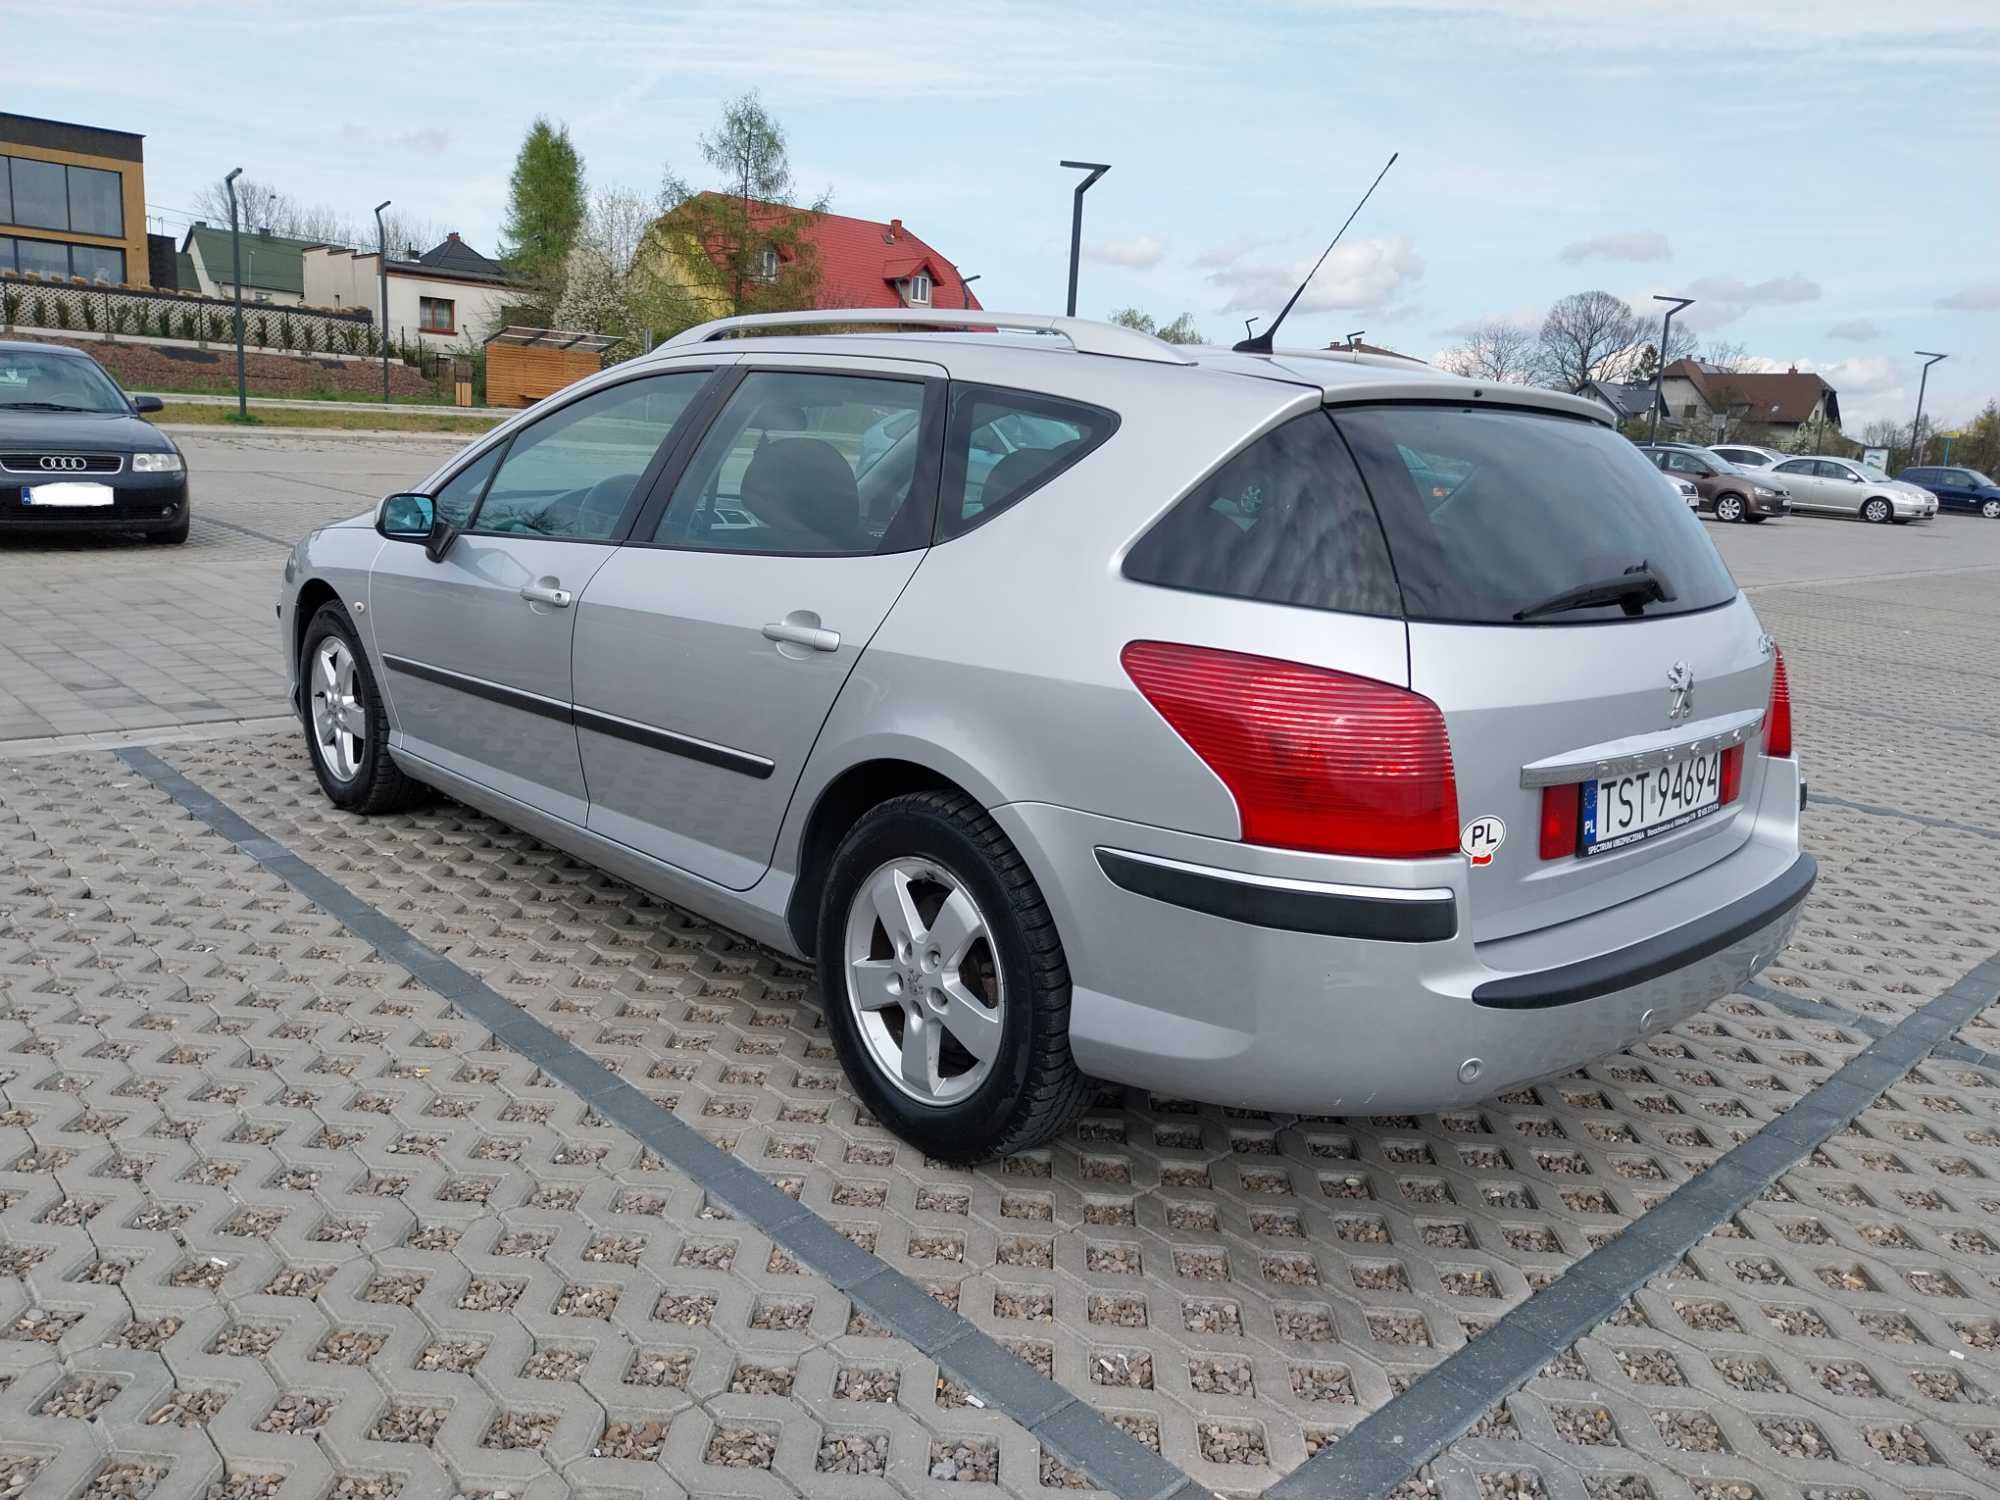 Peugeot 407 SW 2.0 HDI Kombi Panoramiczny dach 2007r